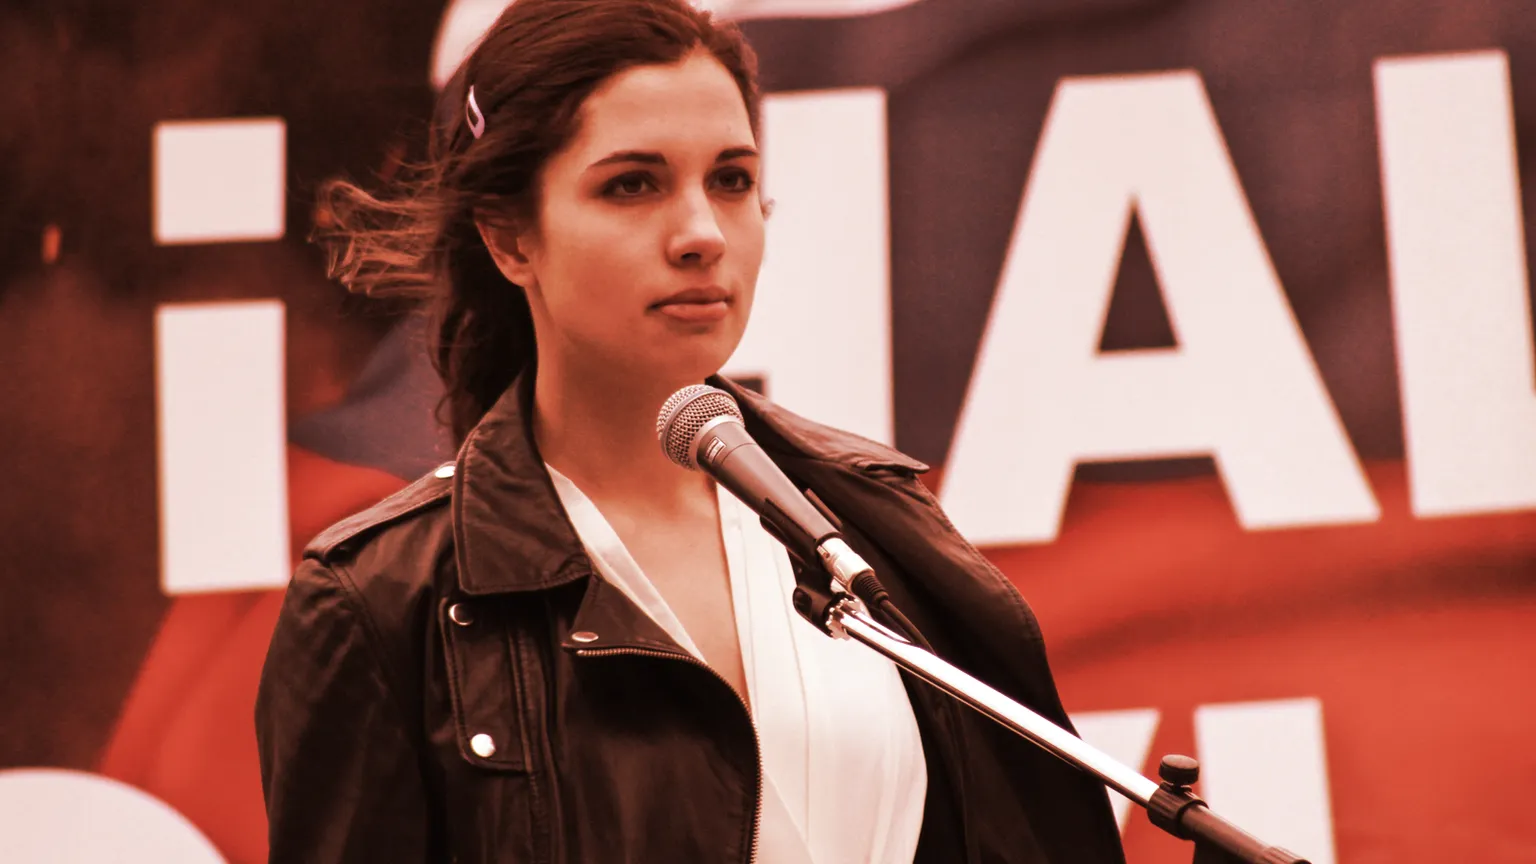 Nadya Tolokonnikova (Pussy Riot) during a 2014 Peace march in support of Ukraine. Image: Shutterstock